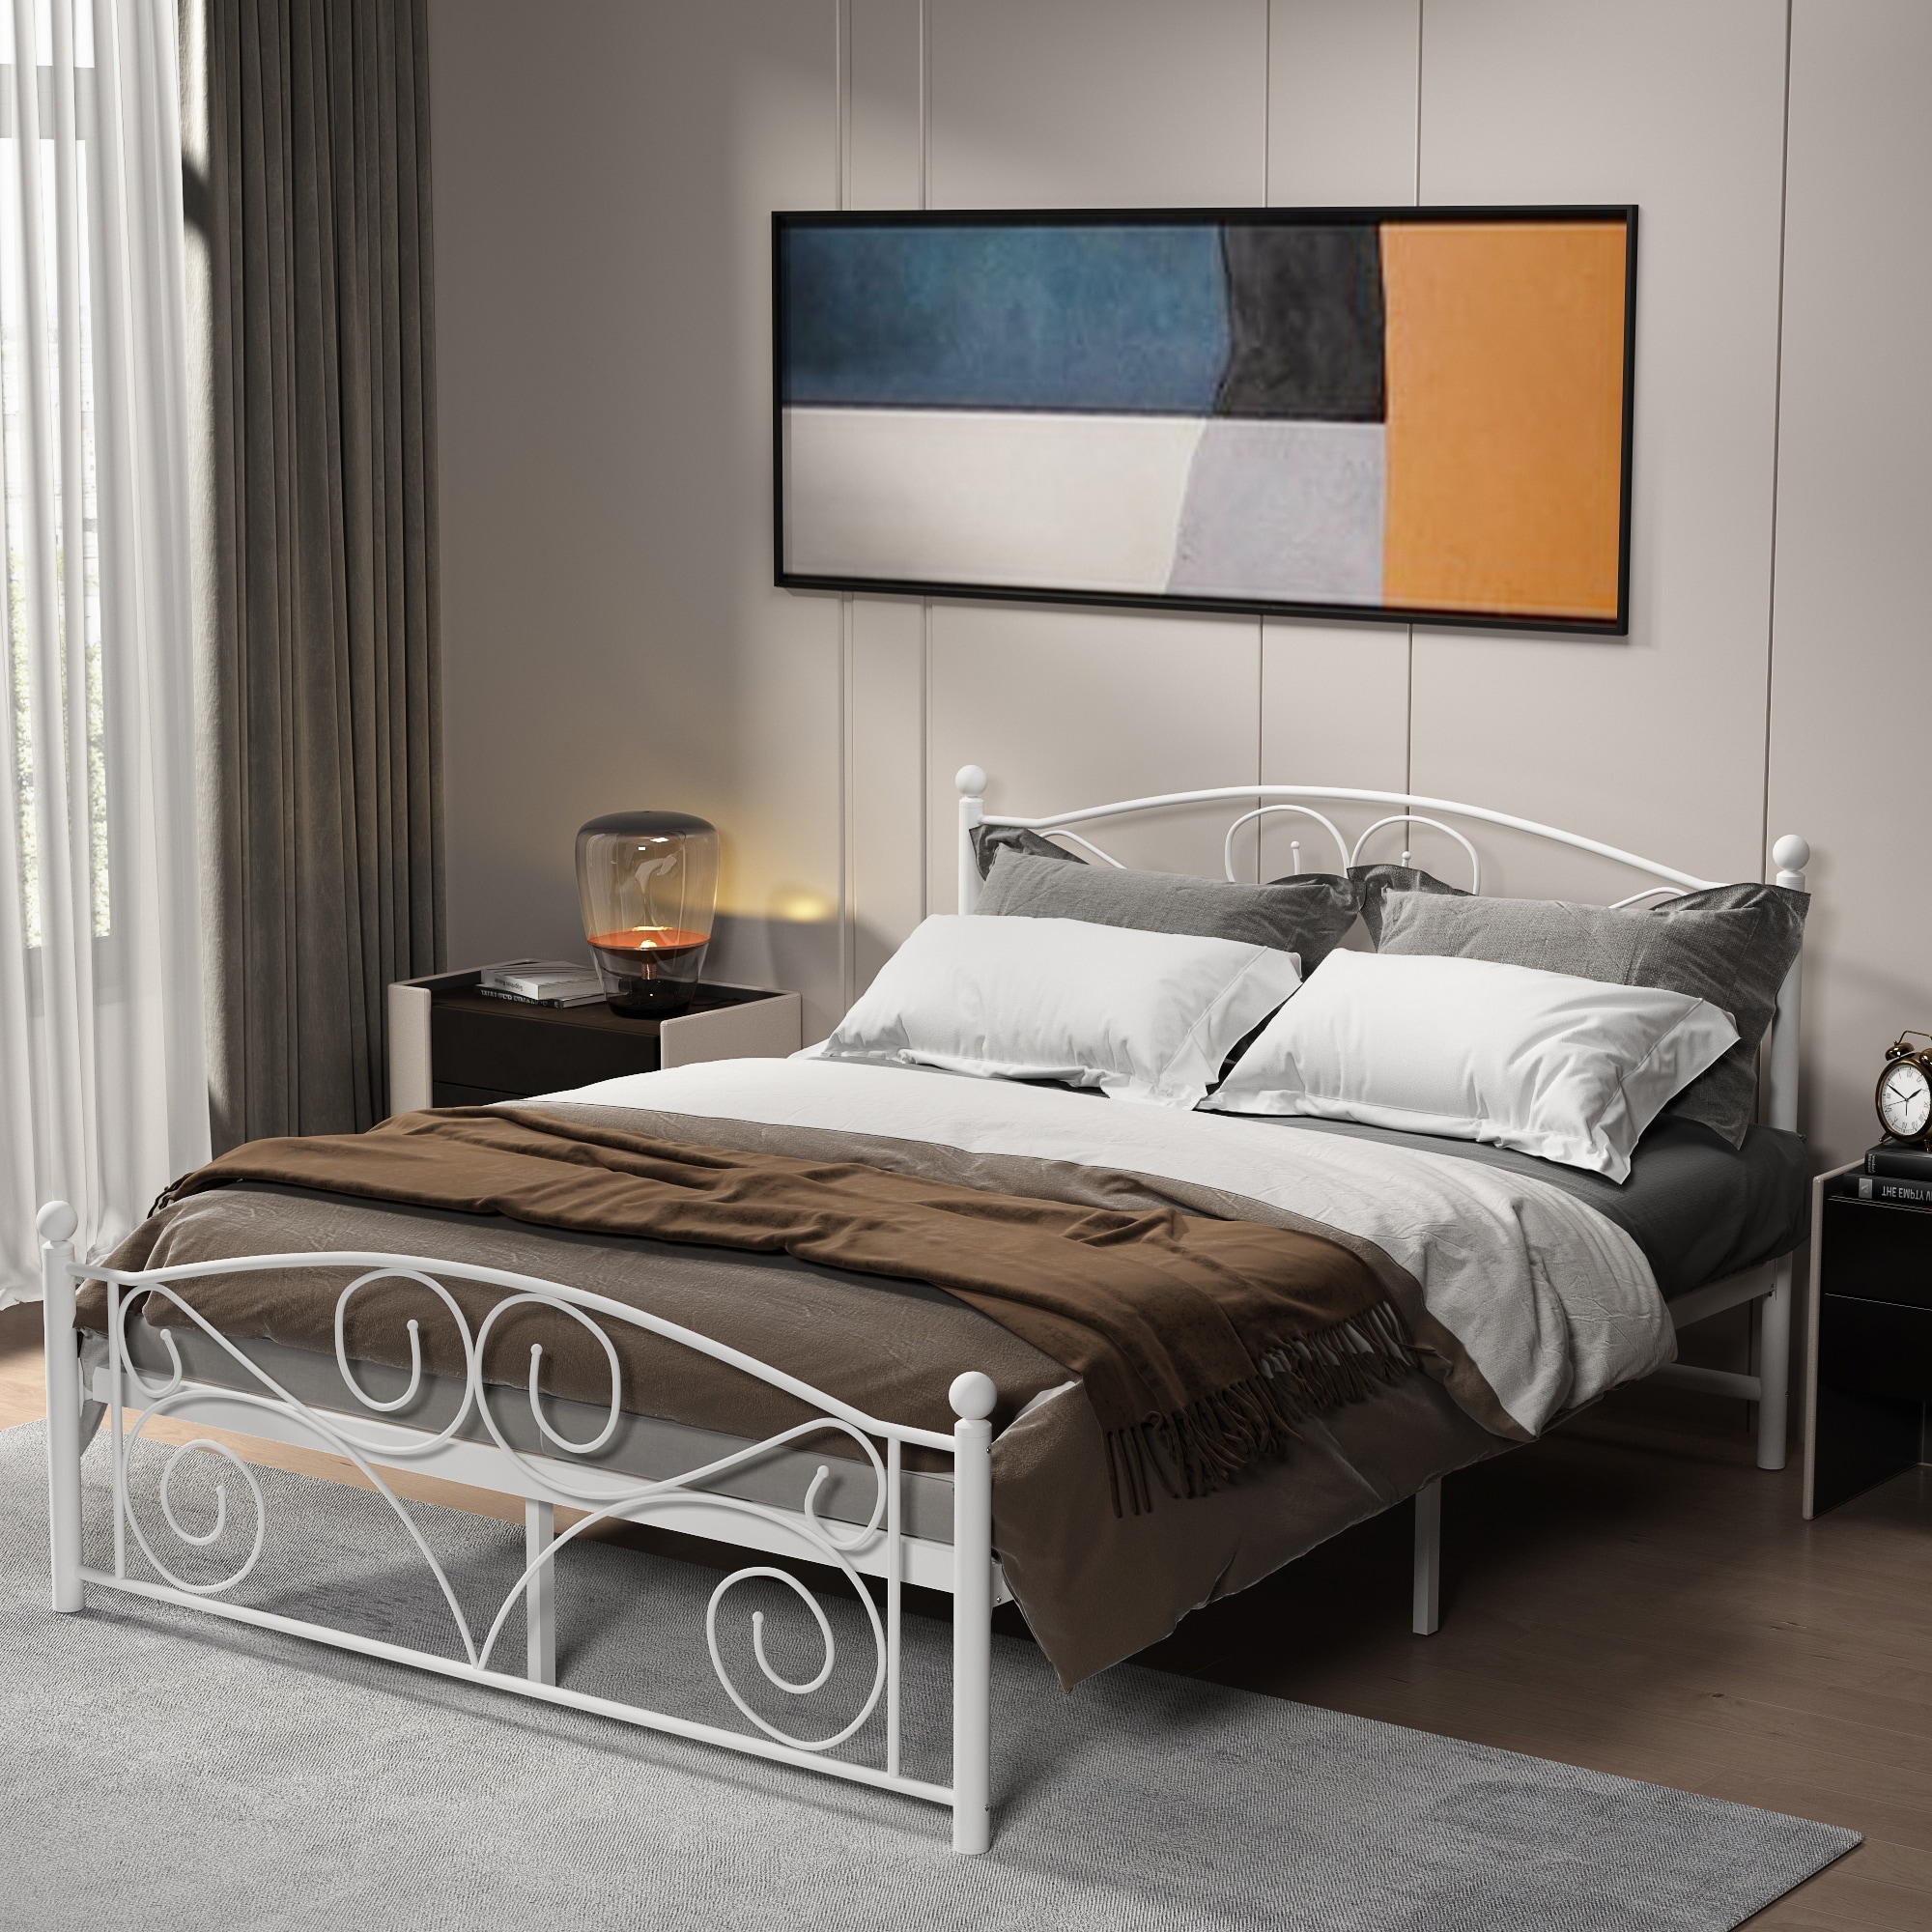 Modern Full Size Metal Platform Bed Frame With Wooden Headboard And Footboard  Modern Lined-curved Flower Pattern